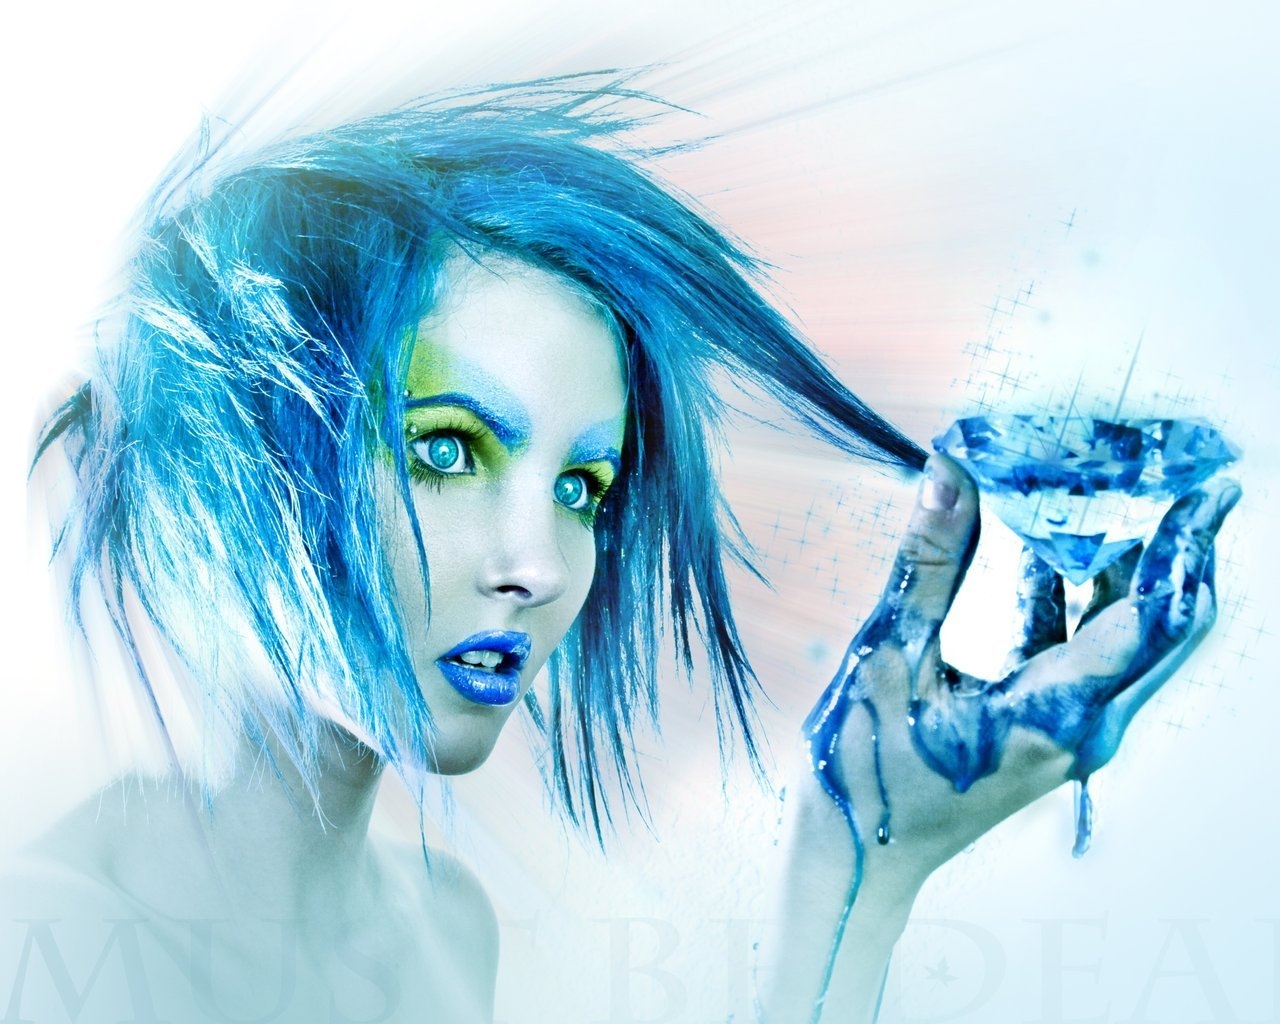 The Blue Girl for 1280 x 1024 resolution